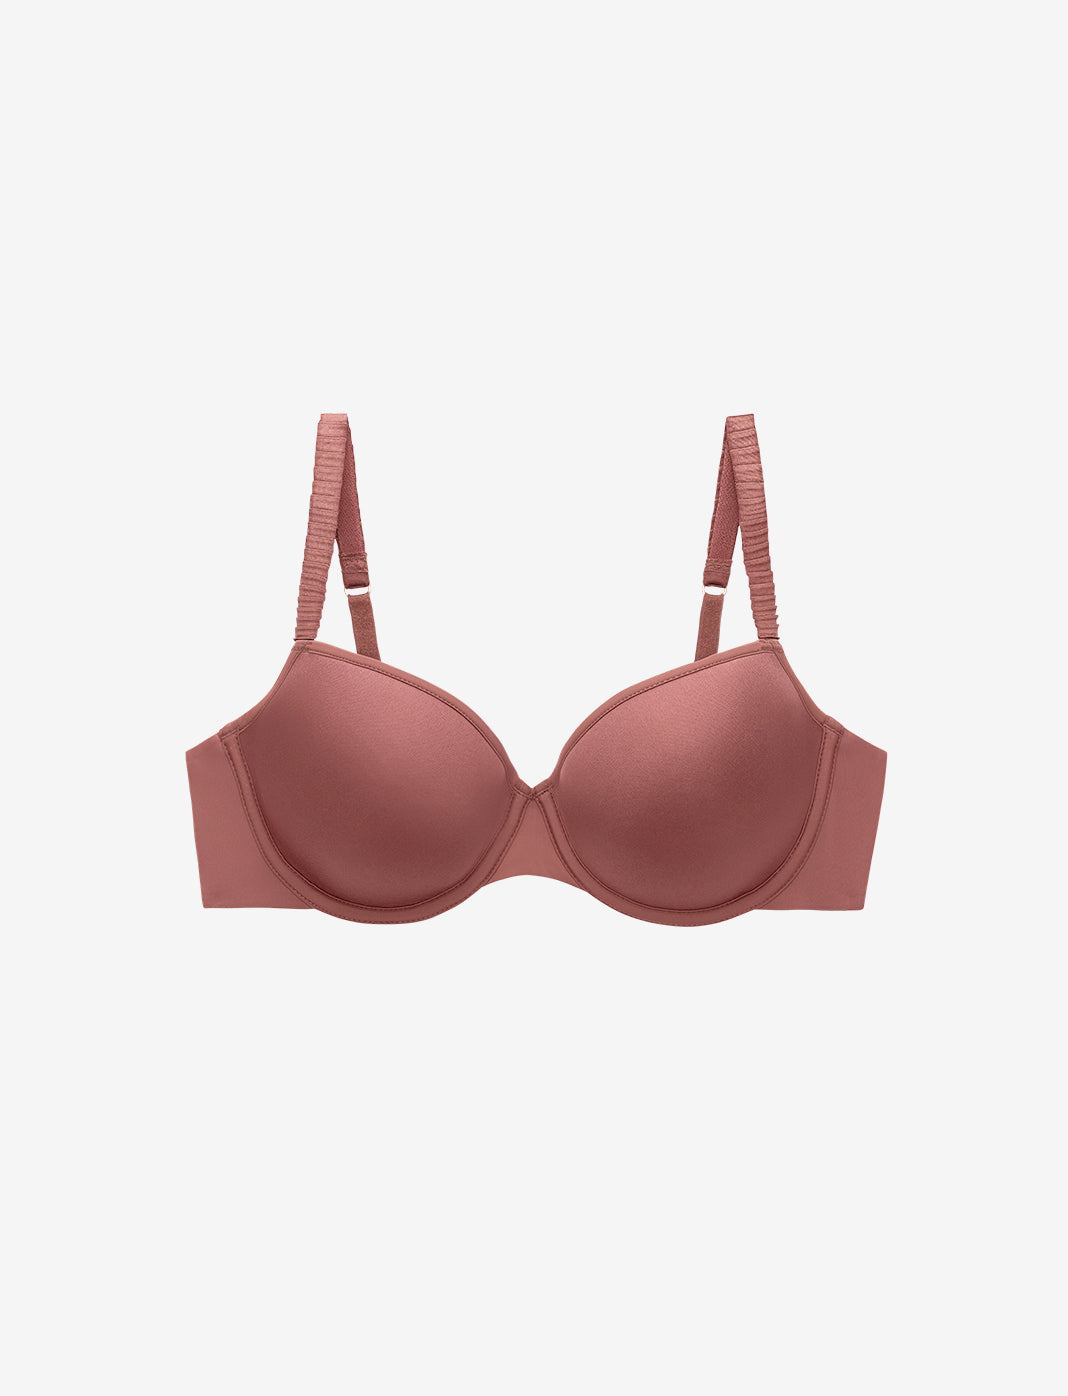 Comfortable & Supportive DD Bras - Best Bras for Double D Breasts - Shop  Half & Full Cup Sizes